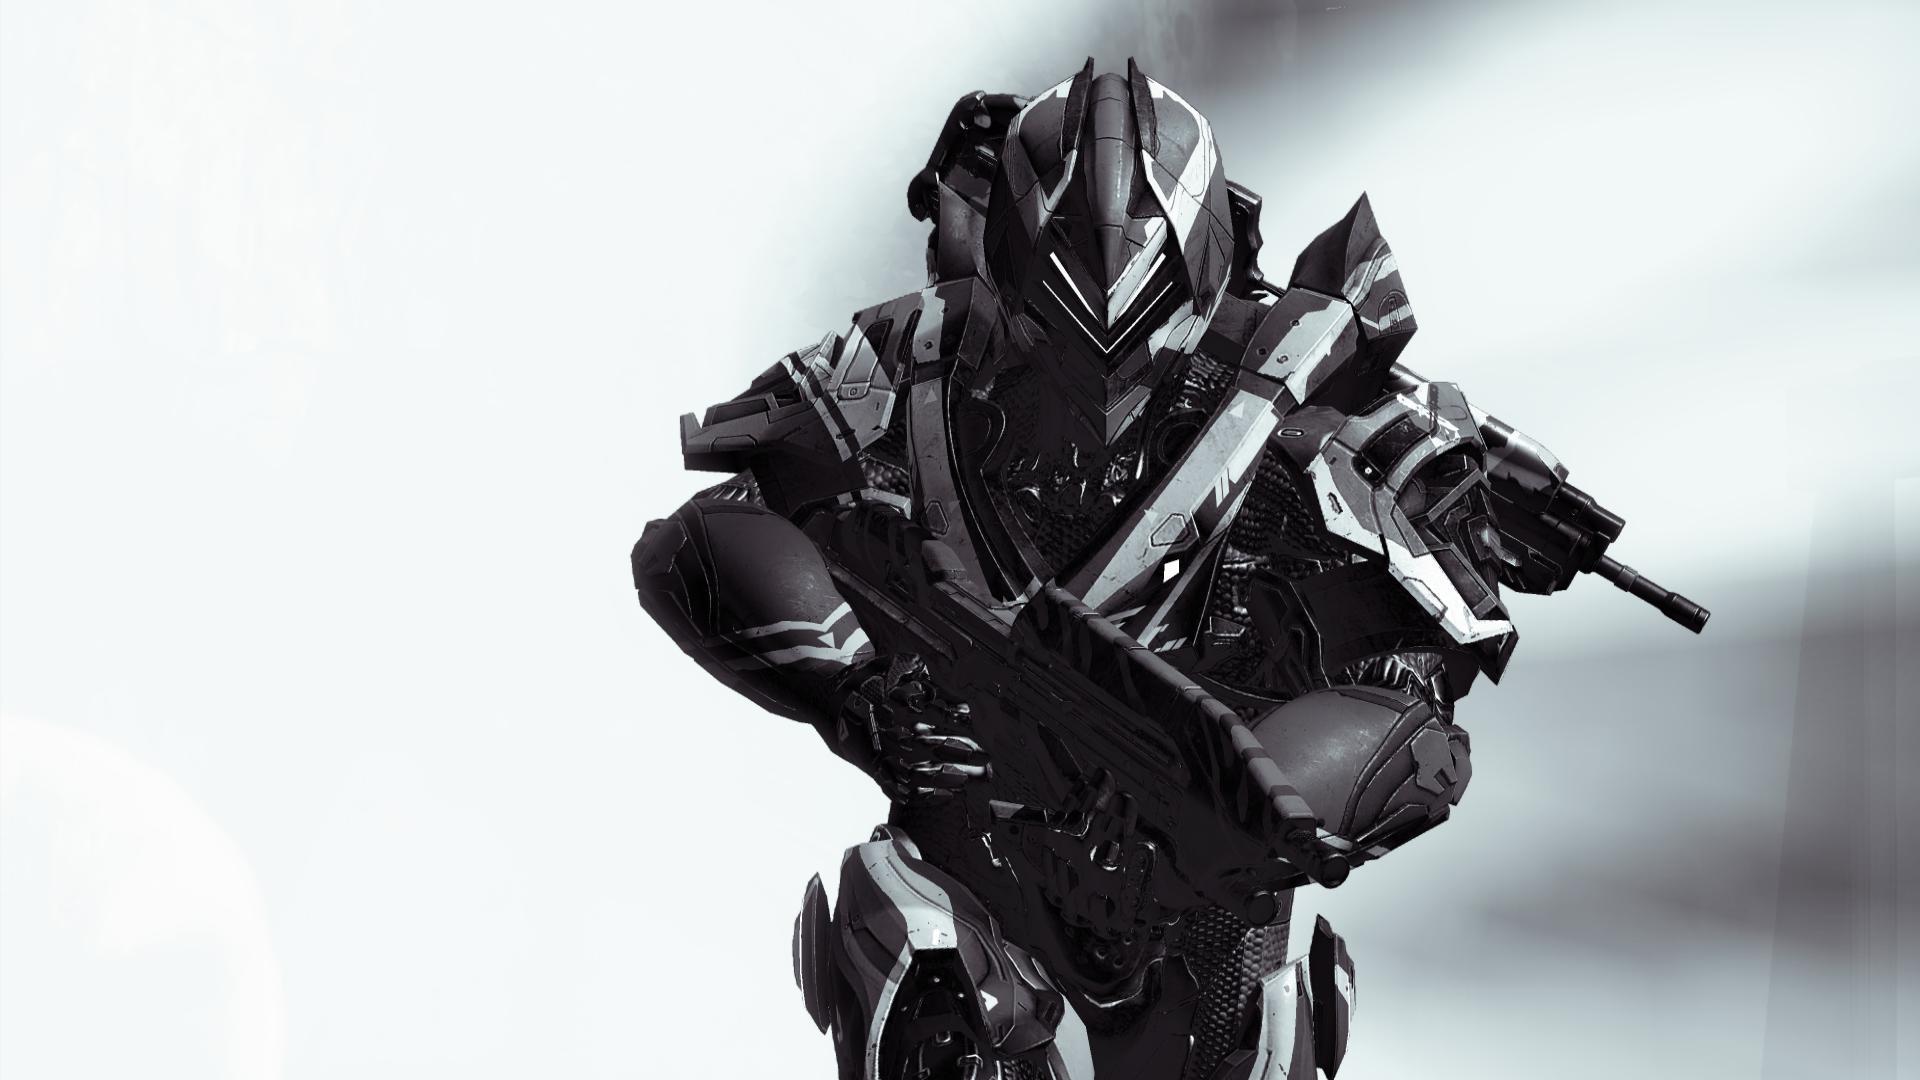 Download Awesome Halo Wallpaper Px High 1920x1080PX Cool Halo 4